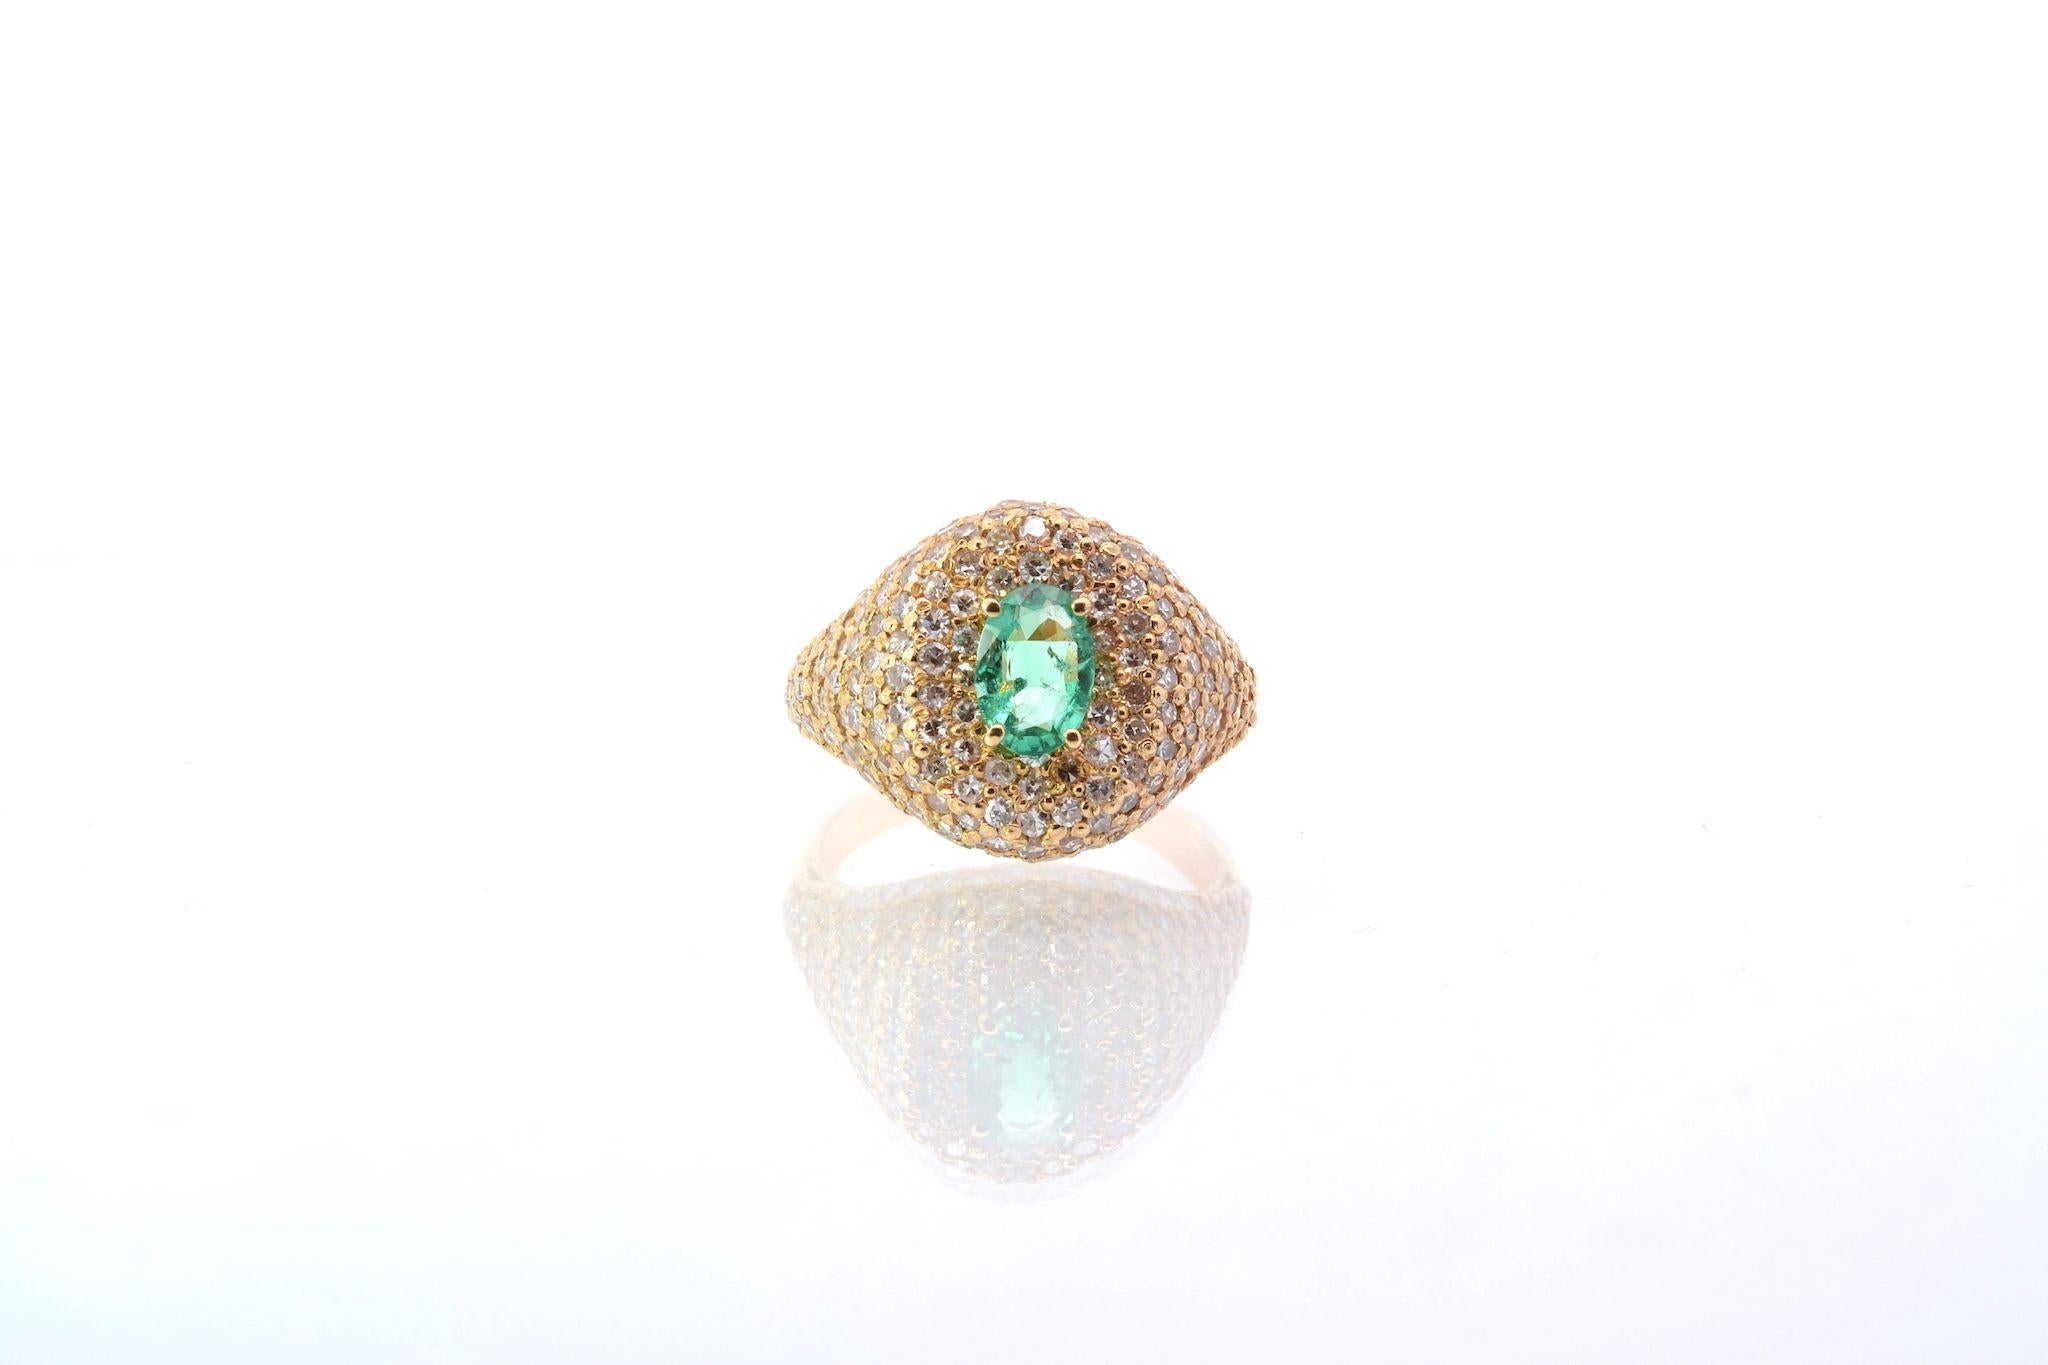 Stones: 1 emerald of 0.60 ct, 166 diamonds cut 8×8: 2.10cts
Material: 18k yellow gold
Dimensions: 1.5cm
Weight: 6.5g
Period: 1970
Size: 53 (free sizing)
Certificate
Ref. : 25336